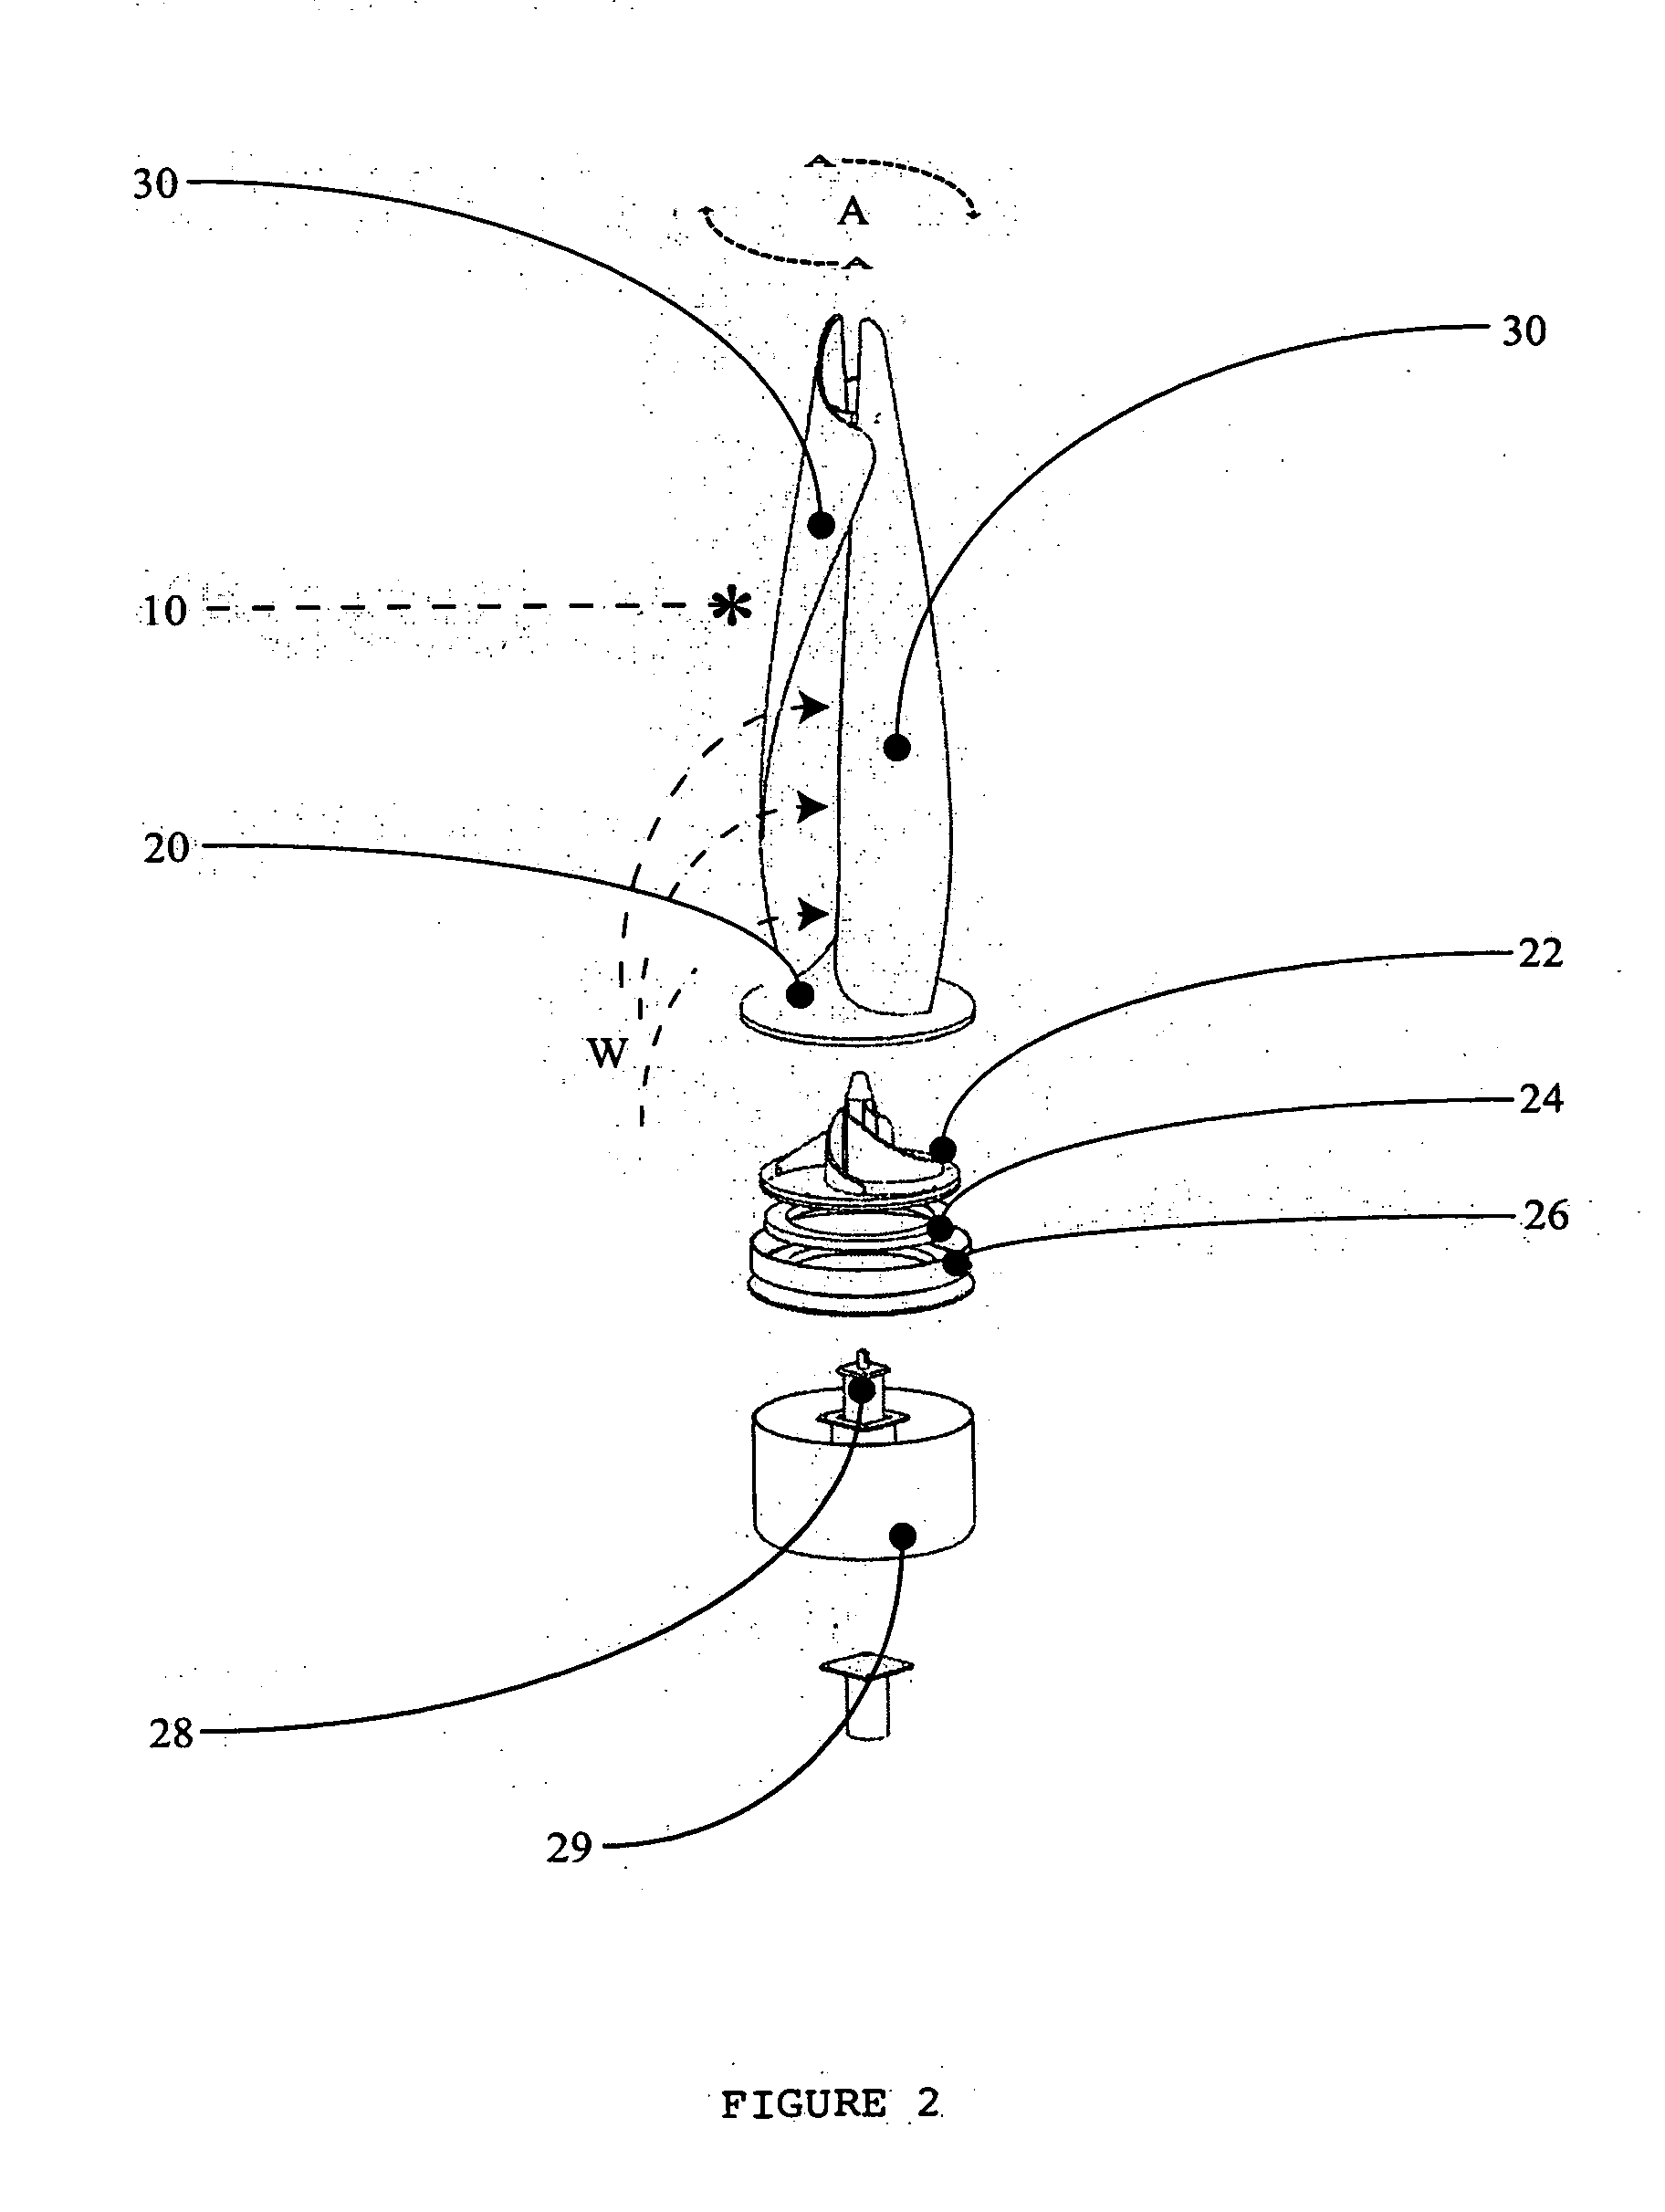 Helical taper induced vortical flow turbine